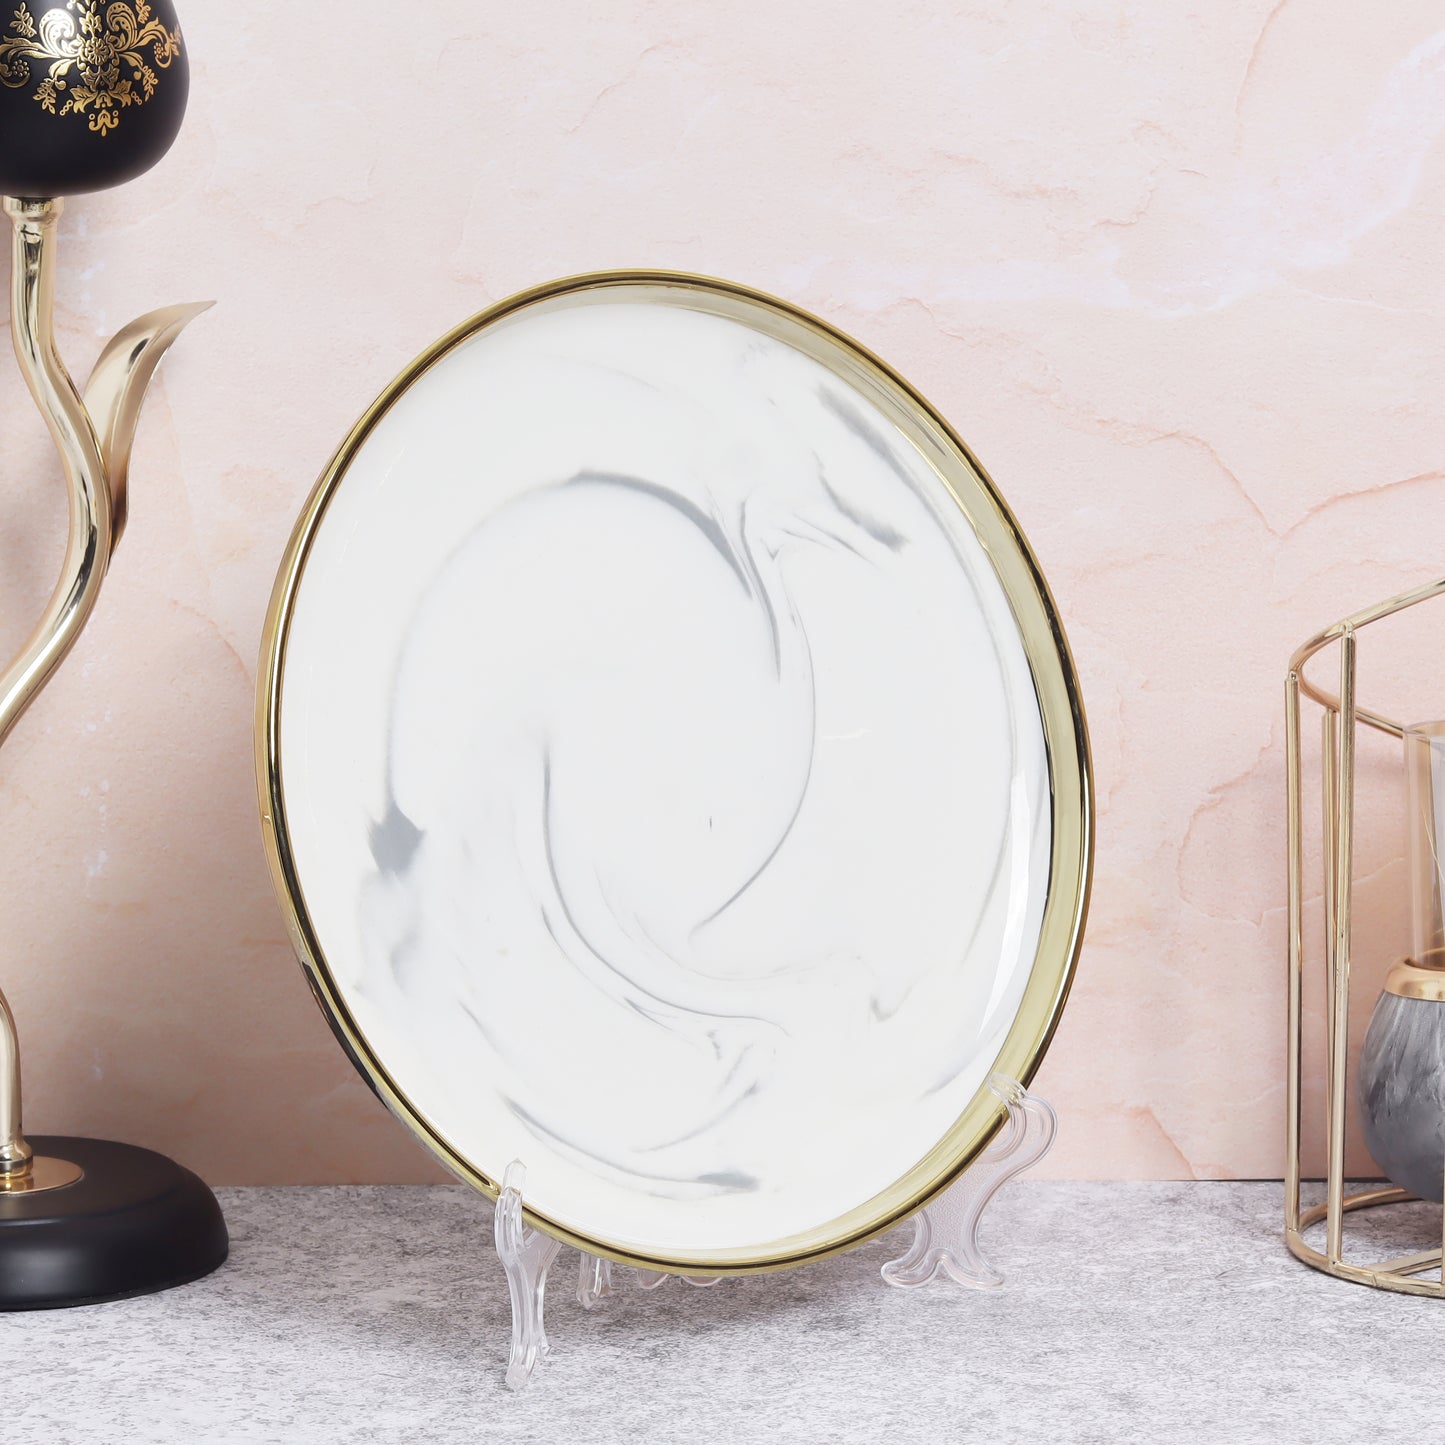 Classic ceramic dinner plate - perfect for stylish table settings